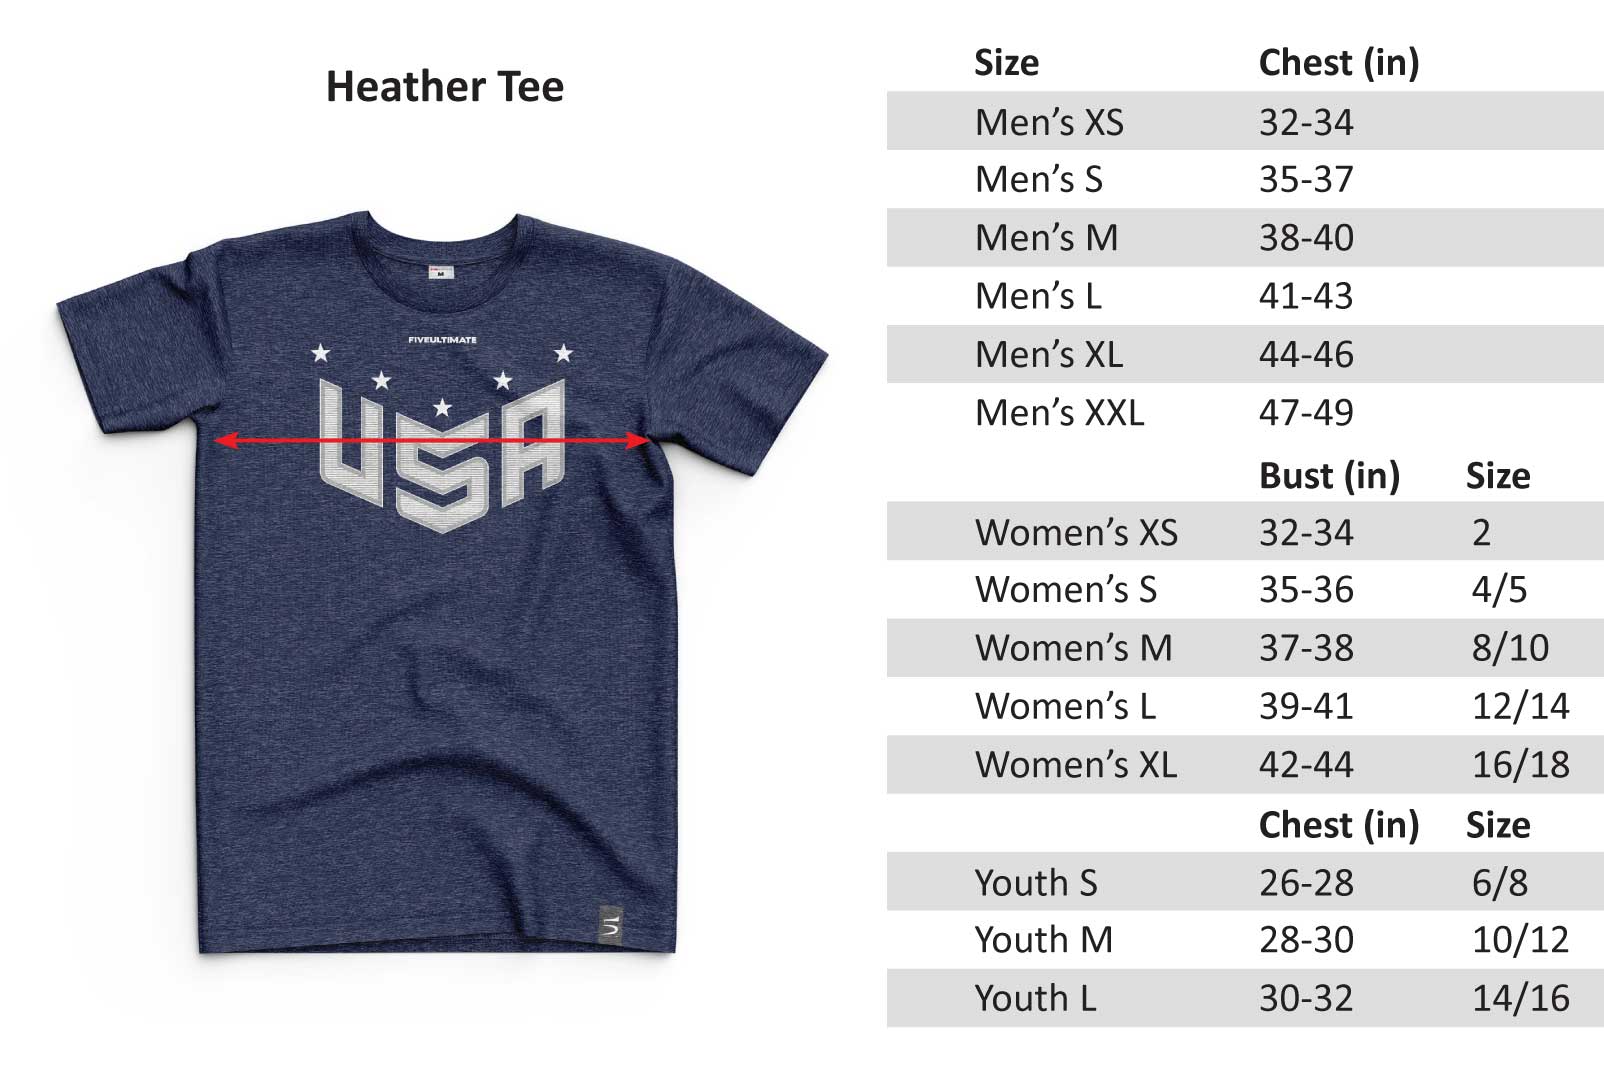 USNT Sizing Chart – Five Ultimate